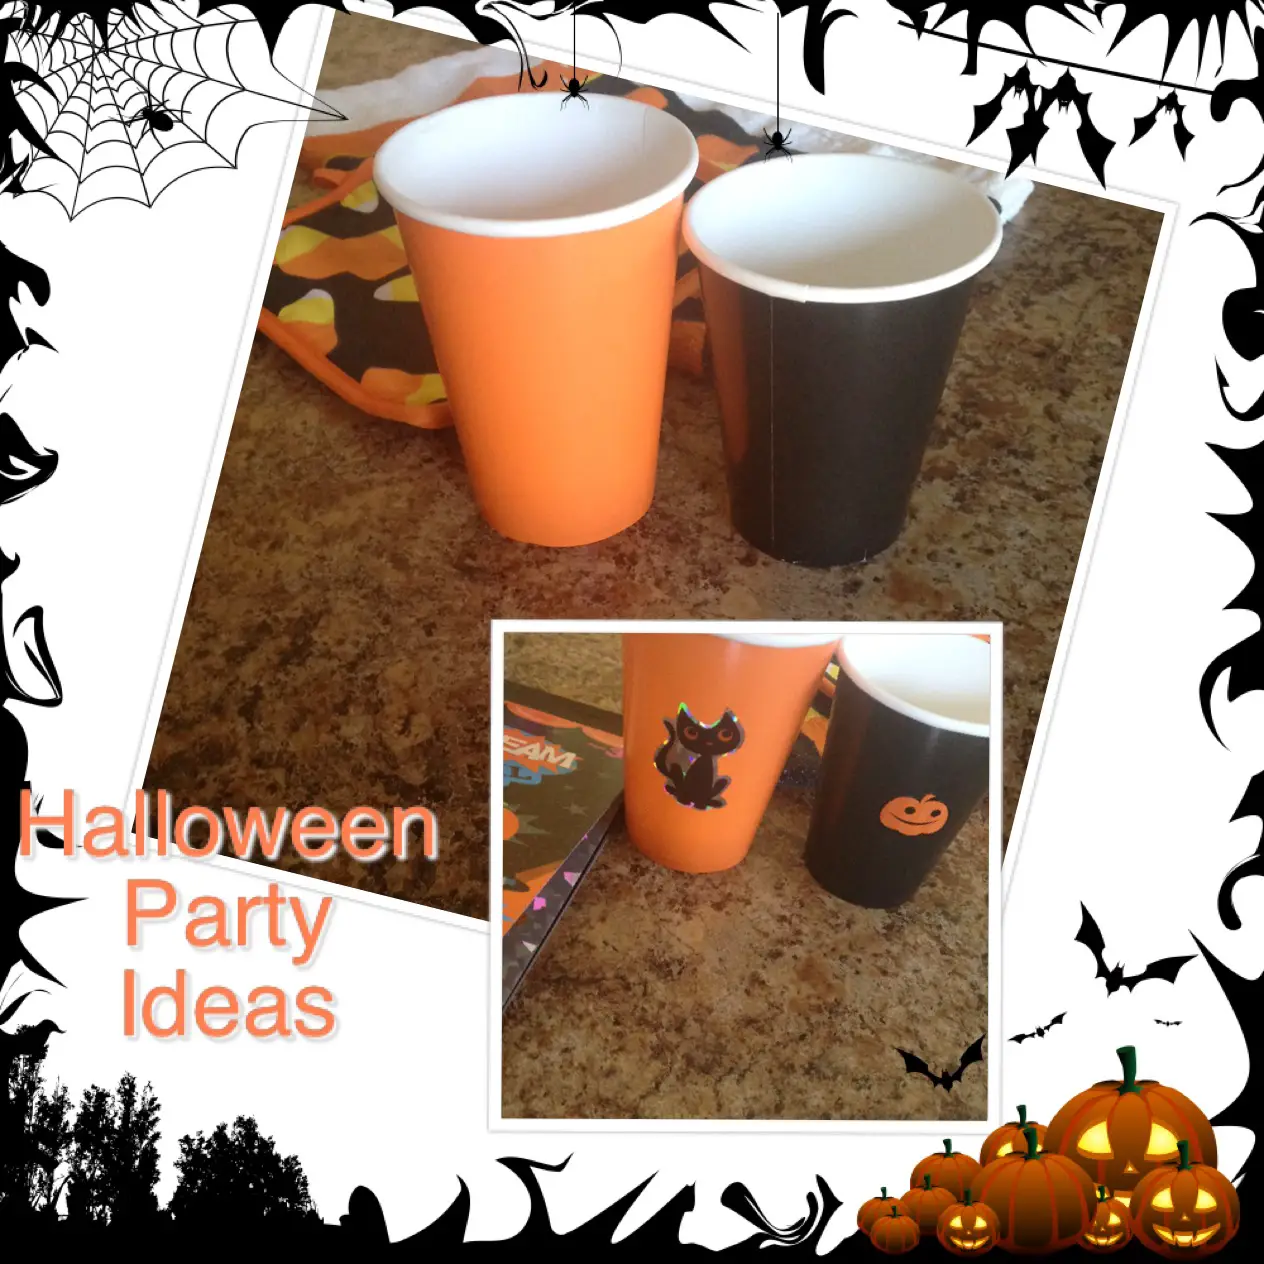 These simple and cute DIY Halloween cups will make the party just wonderful! Fill them with candies or sip on a good Halloween drink from a spooky cup!